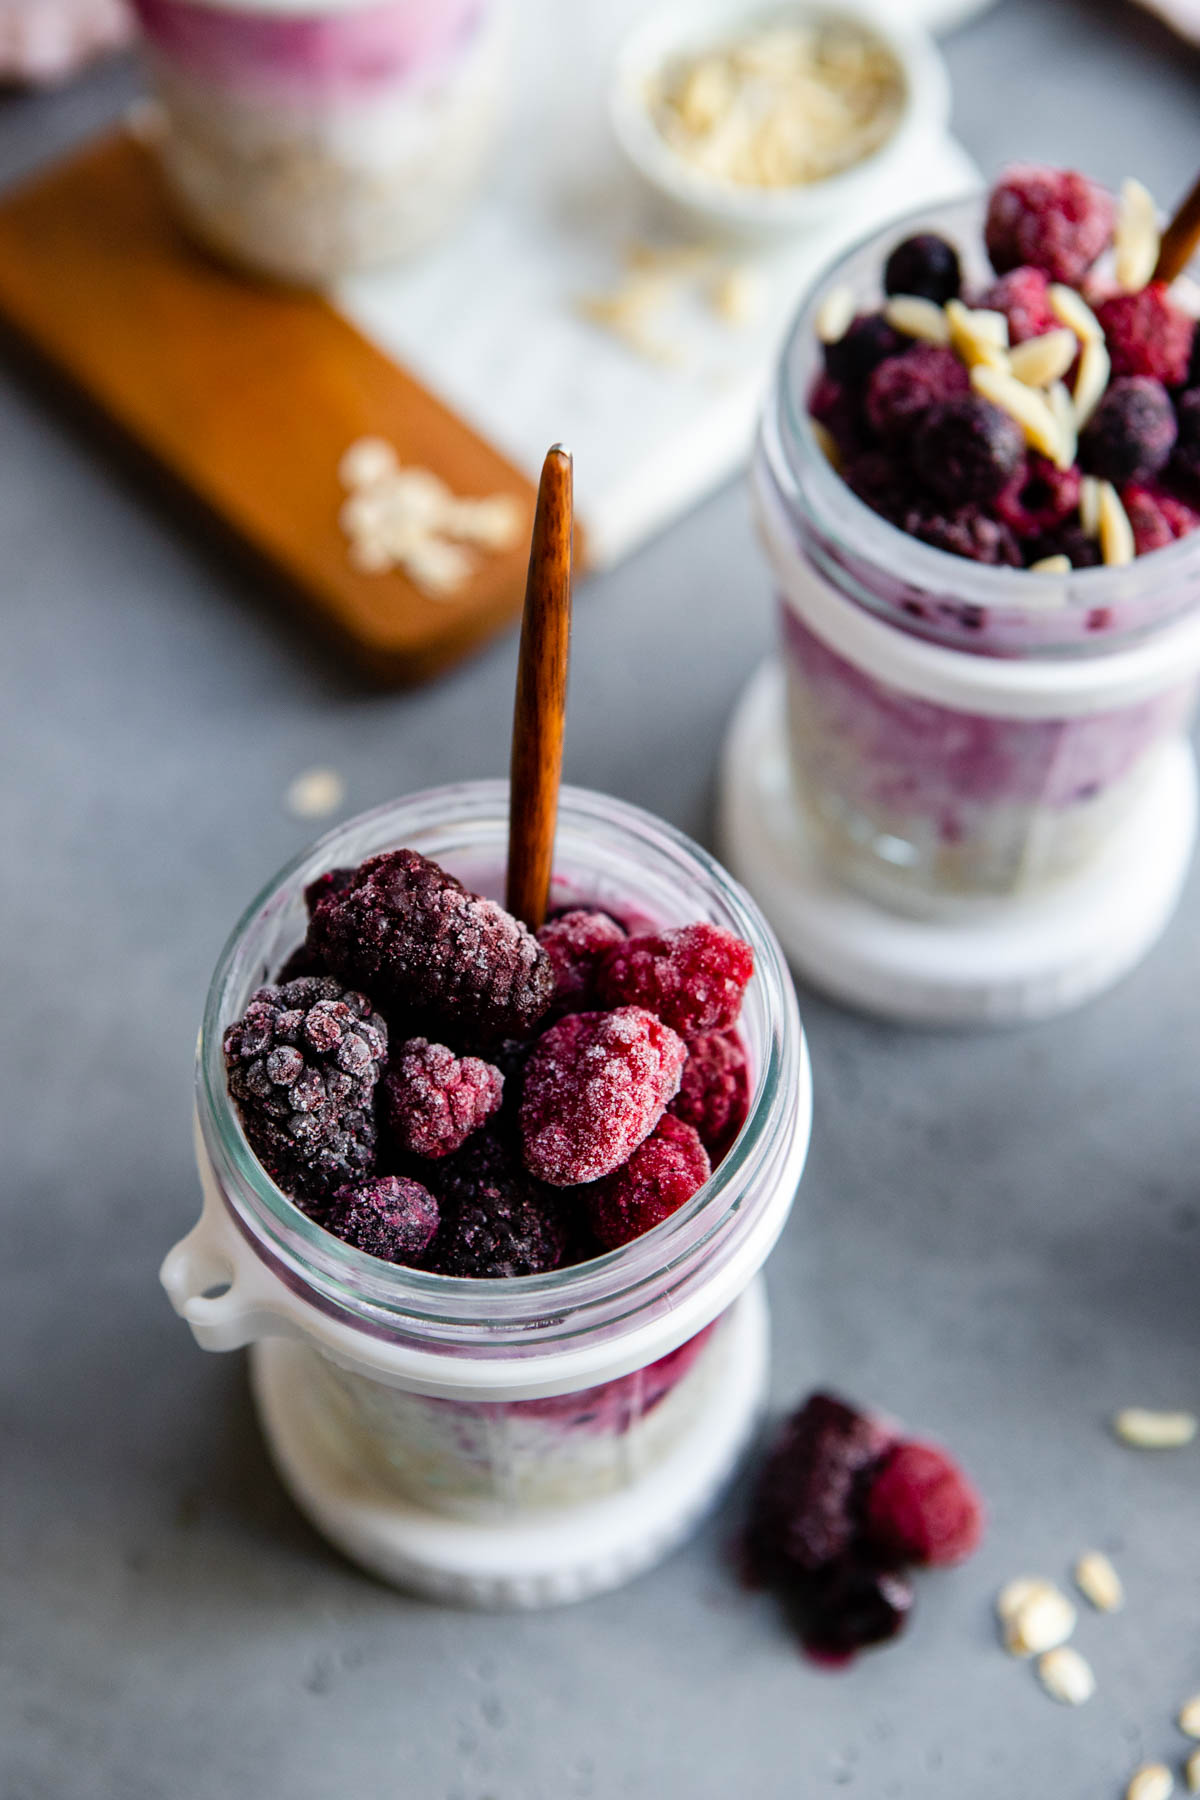 a jar of overnight oats topped with frozen berries and a wood handled spoon set inside the jar